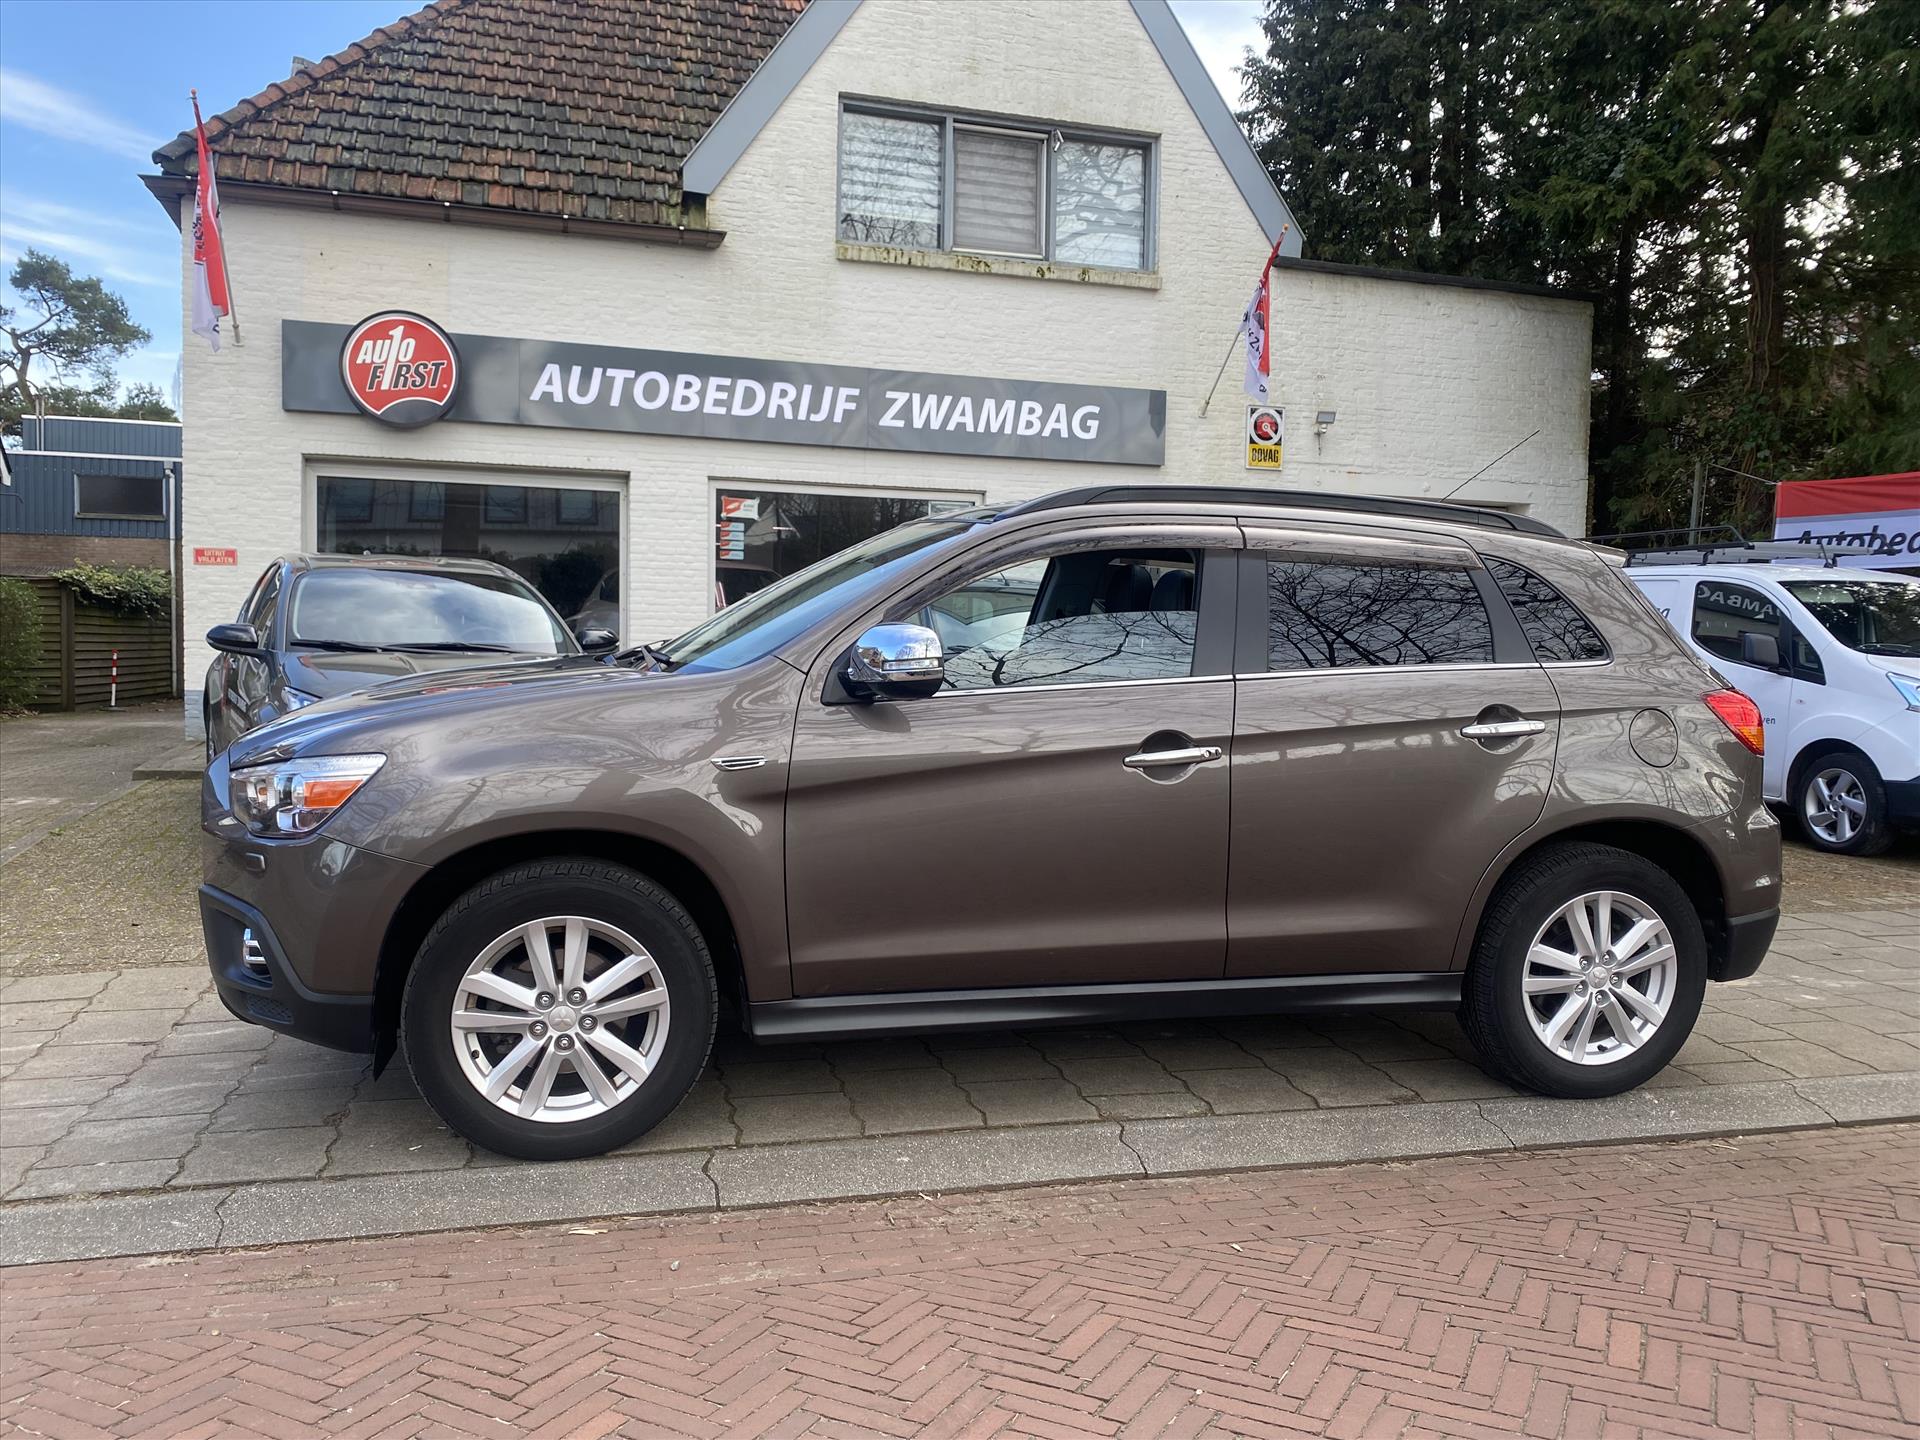 MITSUBISHI Asx 1.6 117pk ClearTec met AS&amp;G Instyle bij viaBOVAG.nl